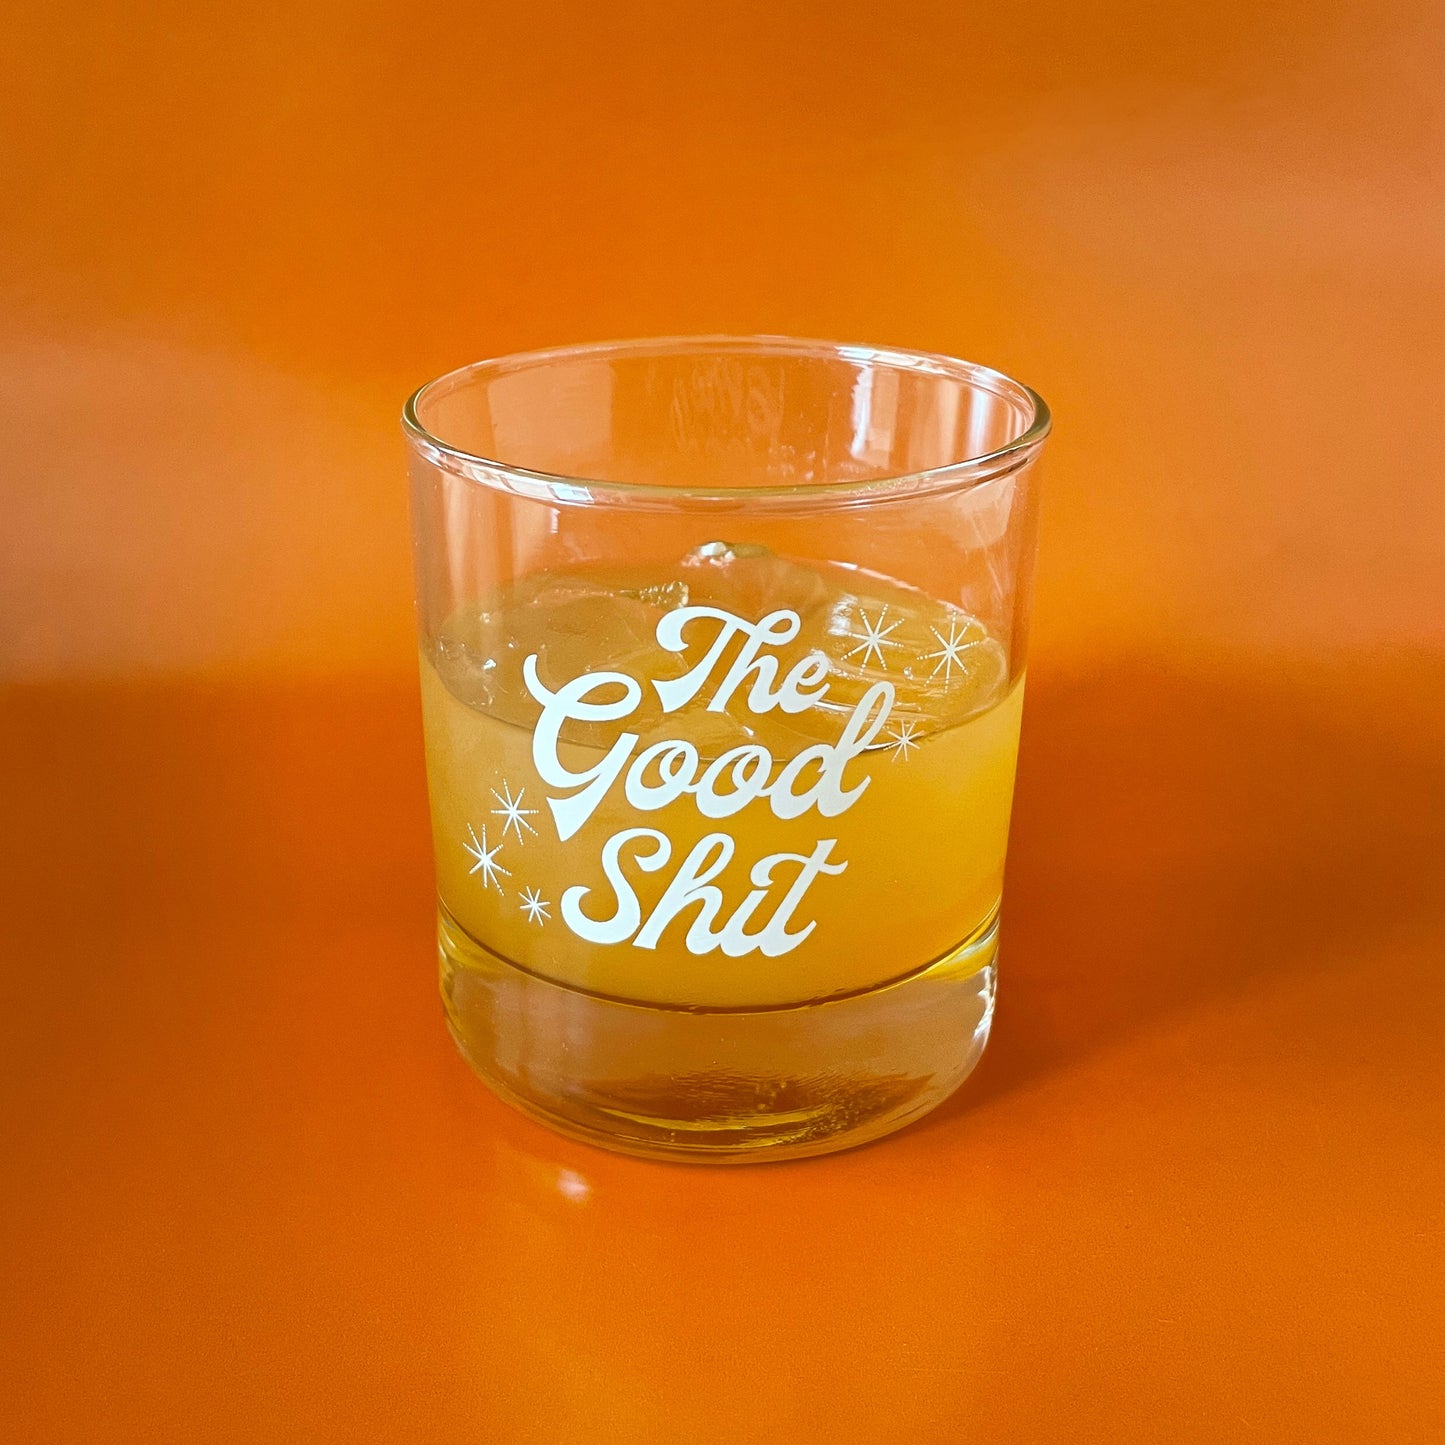 Against an orange background is a photograph of a short glass tumbler with a thick bottom and "The Good Shit" printed across the center in white groovy cursive text.